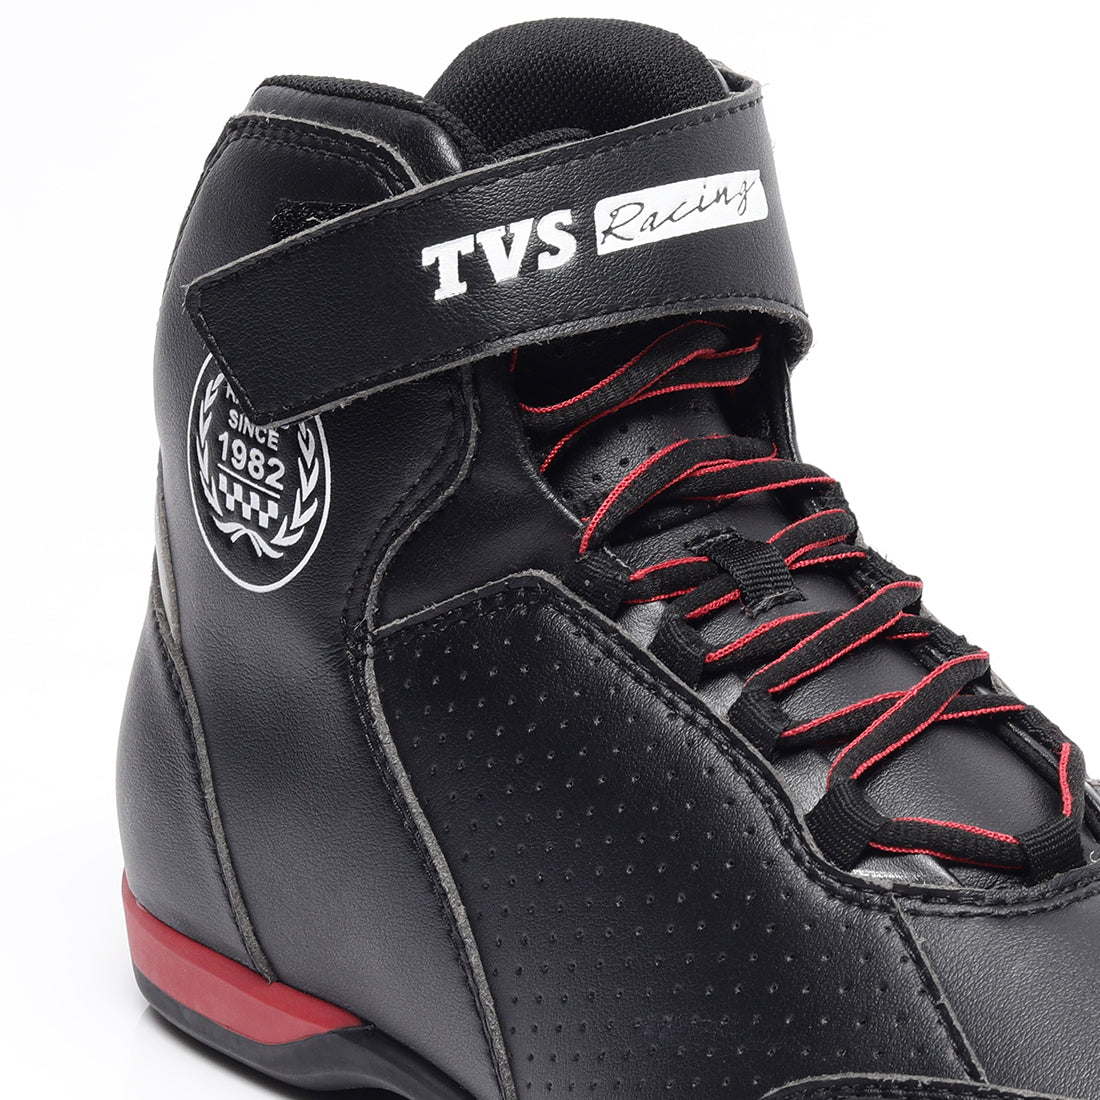  TVS Racing Ankle Length Riding Boots for Men:Anti-Microbial & Waterproof Riding Shoes with Reflective Panels, Ventilated Biker Boots with Ankle-Toe Protection-Premium Men's Riding Boots (Grey)